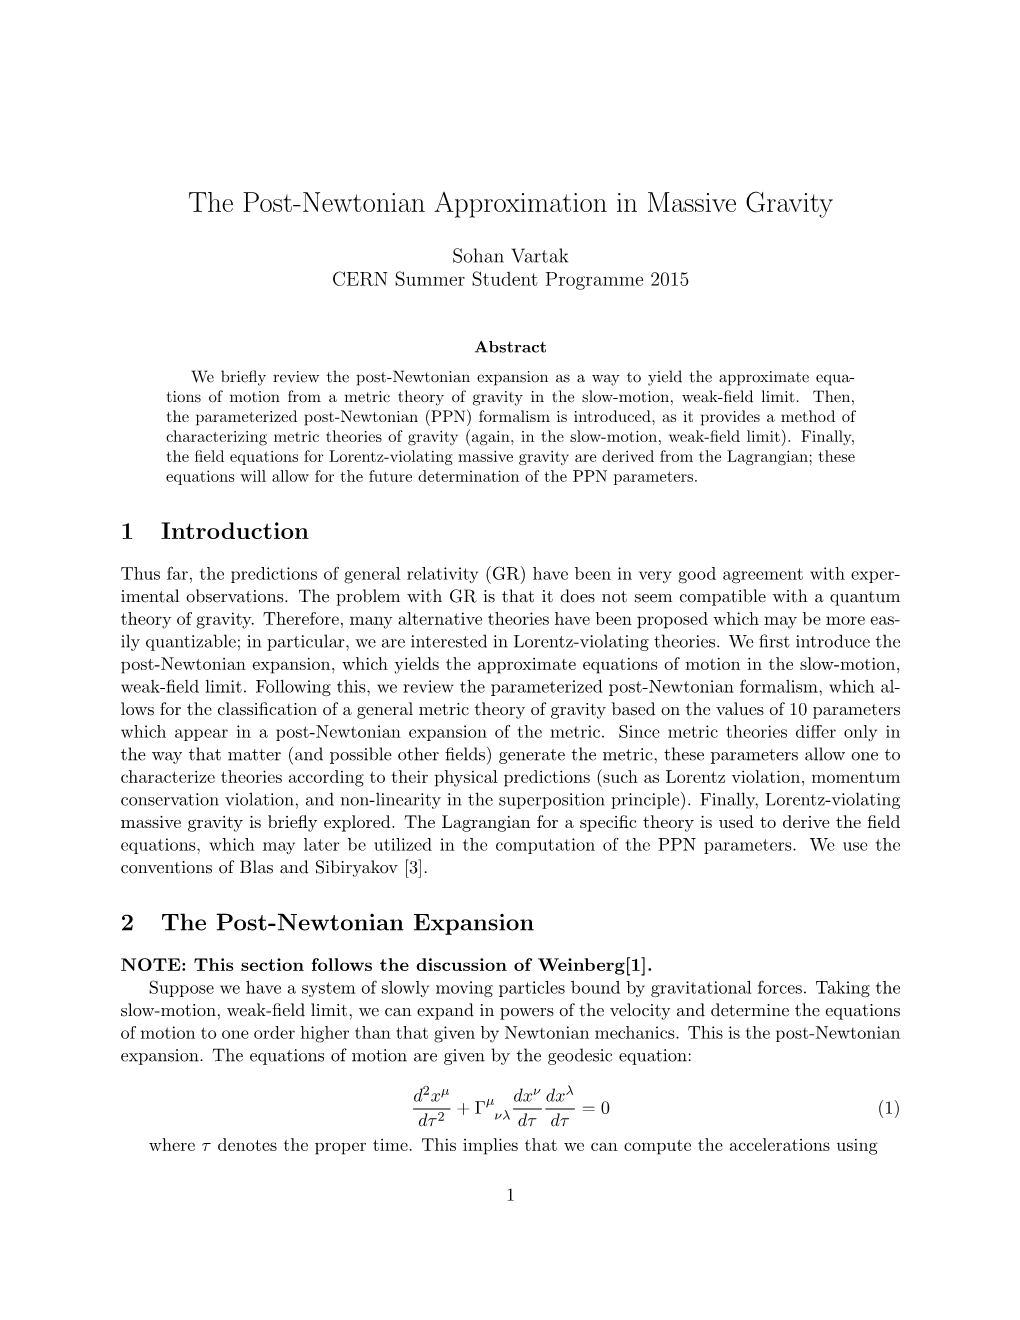 The Post-Newtonian Approximation in Massive Gravity